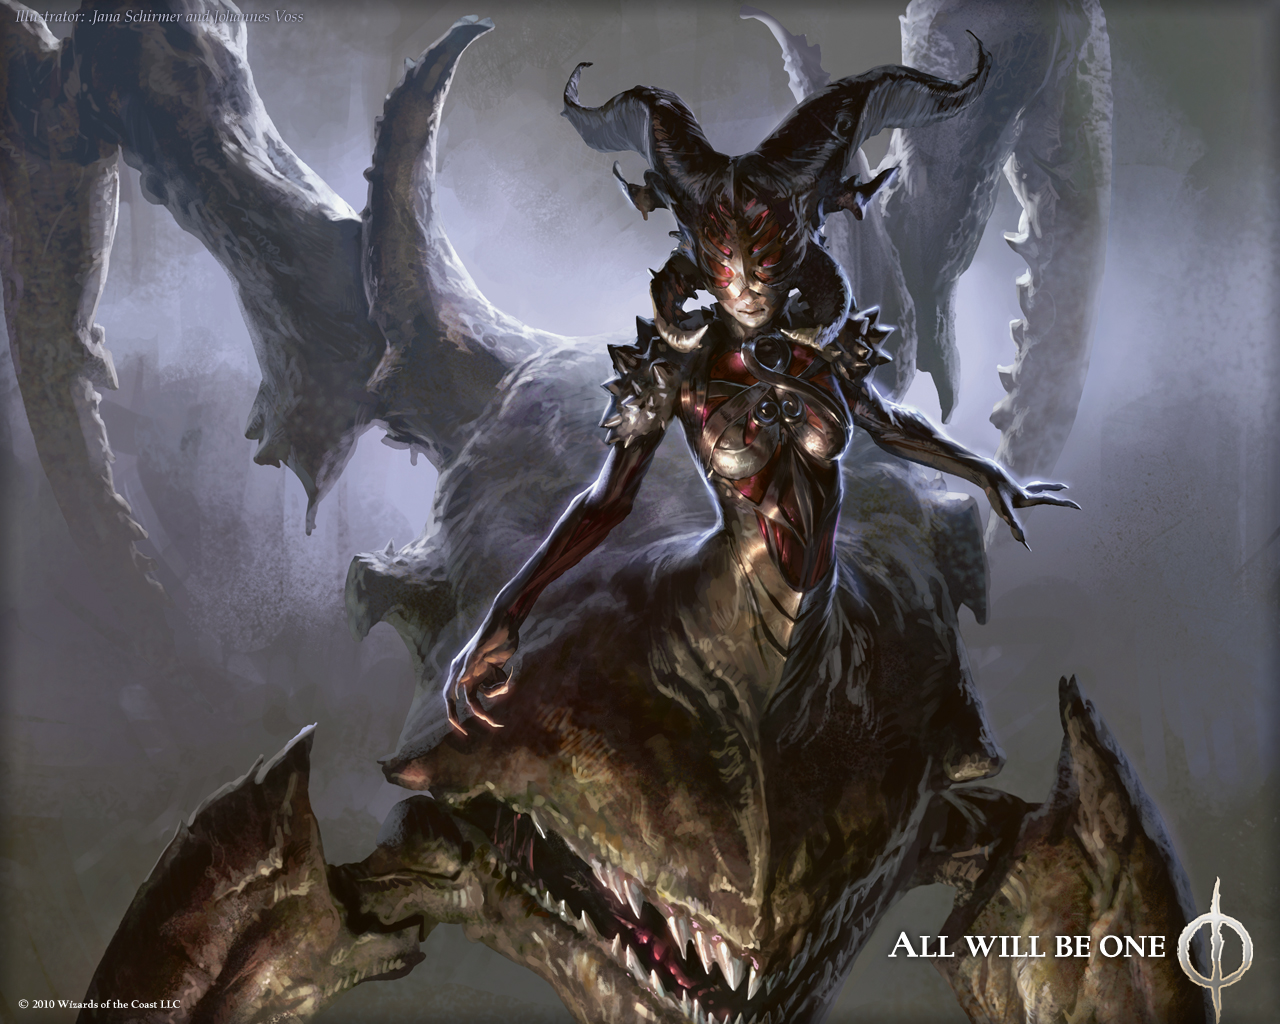 General 1280x1024 Magic: The Gathering gamer creature horns 2010 (Year) fantasy art Wizards of the Coast